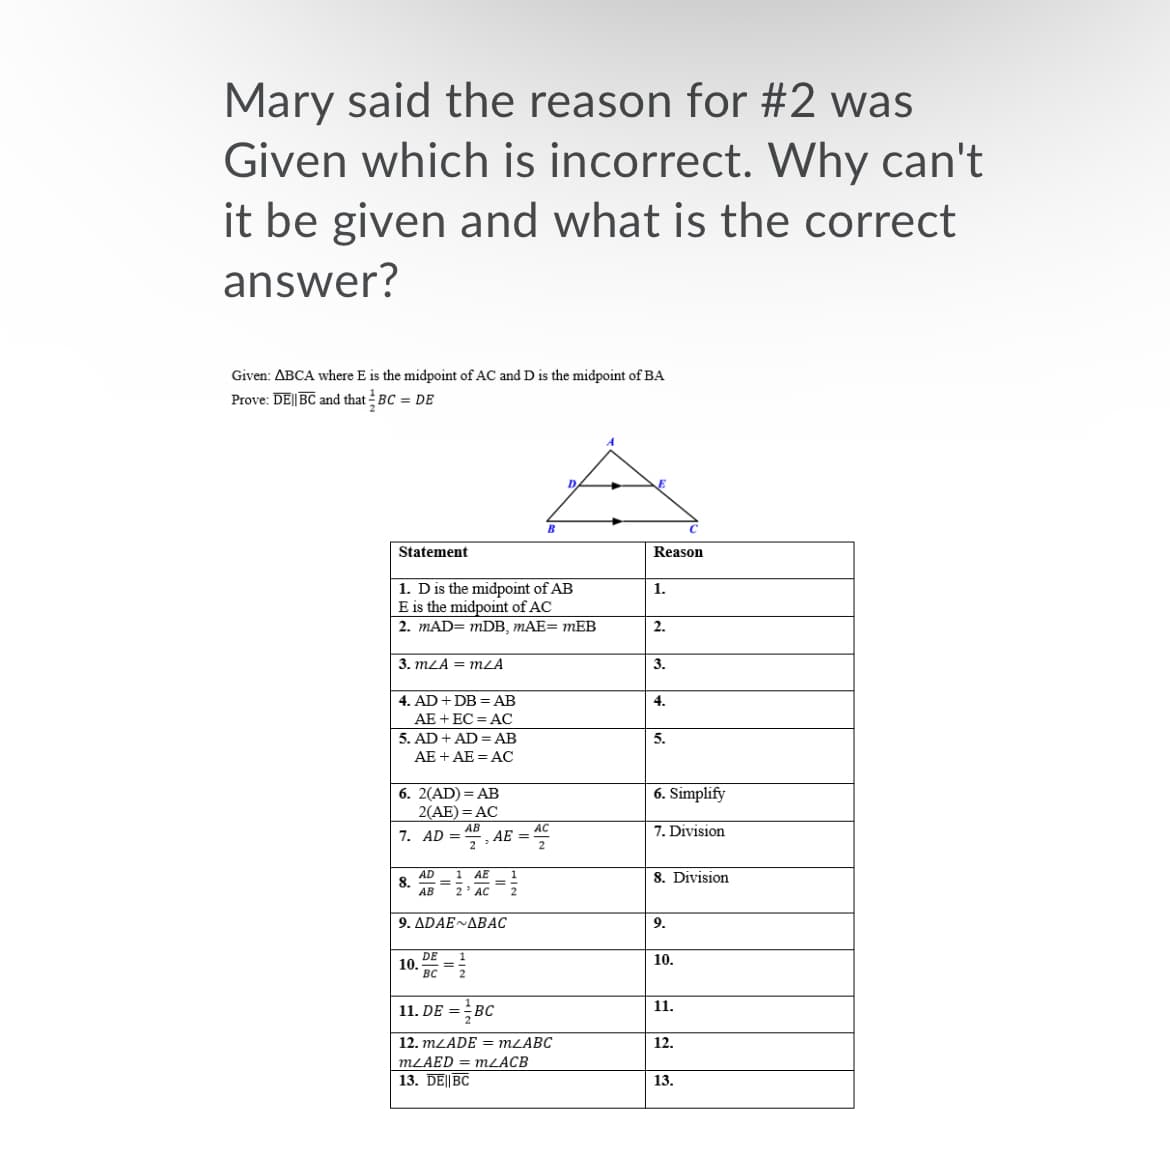 Mary said the reason for #2 was
Given which is incorrect. Why can't
it be given and what is the correct
answer?
Given: ABCA where E is the midpoint of AC and D is the midpoint of BA
Prove: DE|| BC and that BC = De
B
Statement
Reason
1. Dis the midpoint of AB
E is the midpoint of AC
1.
2. mAD= mDB, MAE= mEB
2.
3. mLA = mZĀ
3.
4. AD + DB = AB
AE + EC = AC
5. AD + AD = AB
4.
5.
AE + AE = AC
6. 2(AD) = AB
2(AE) = AC
6. Simplify
77. AD =
AE =
7. Division
8. Division
AD
8.
АВ
1
АЕ
2' AC
9. ΔDAE~ΔΒAC
9.
DE
10.
вс
10.
11. DE = BC
11.
12. MLADE = MLABC
12.
MLAED = MZACB
13. DE||BC
13.
